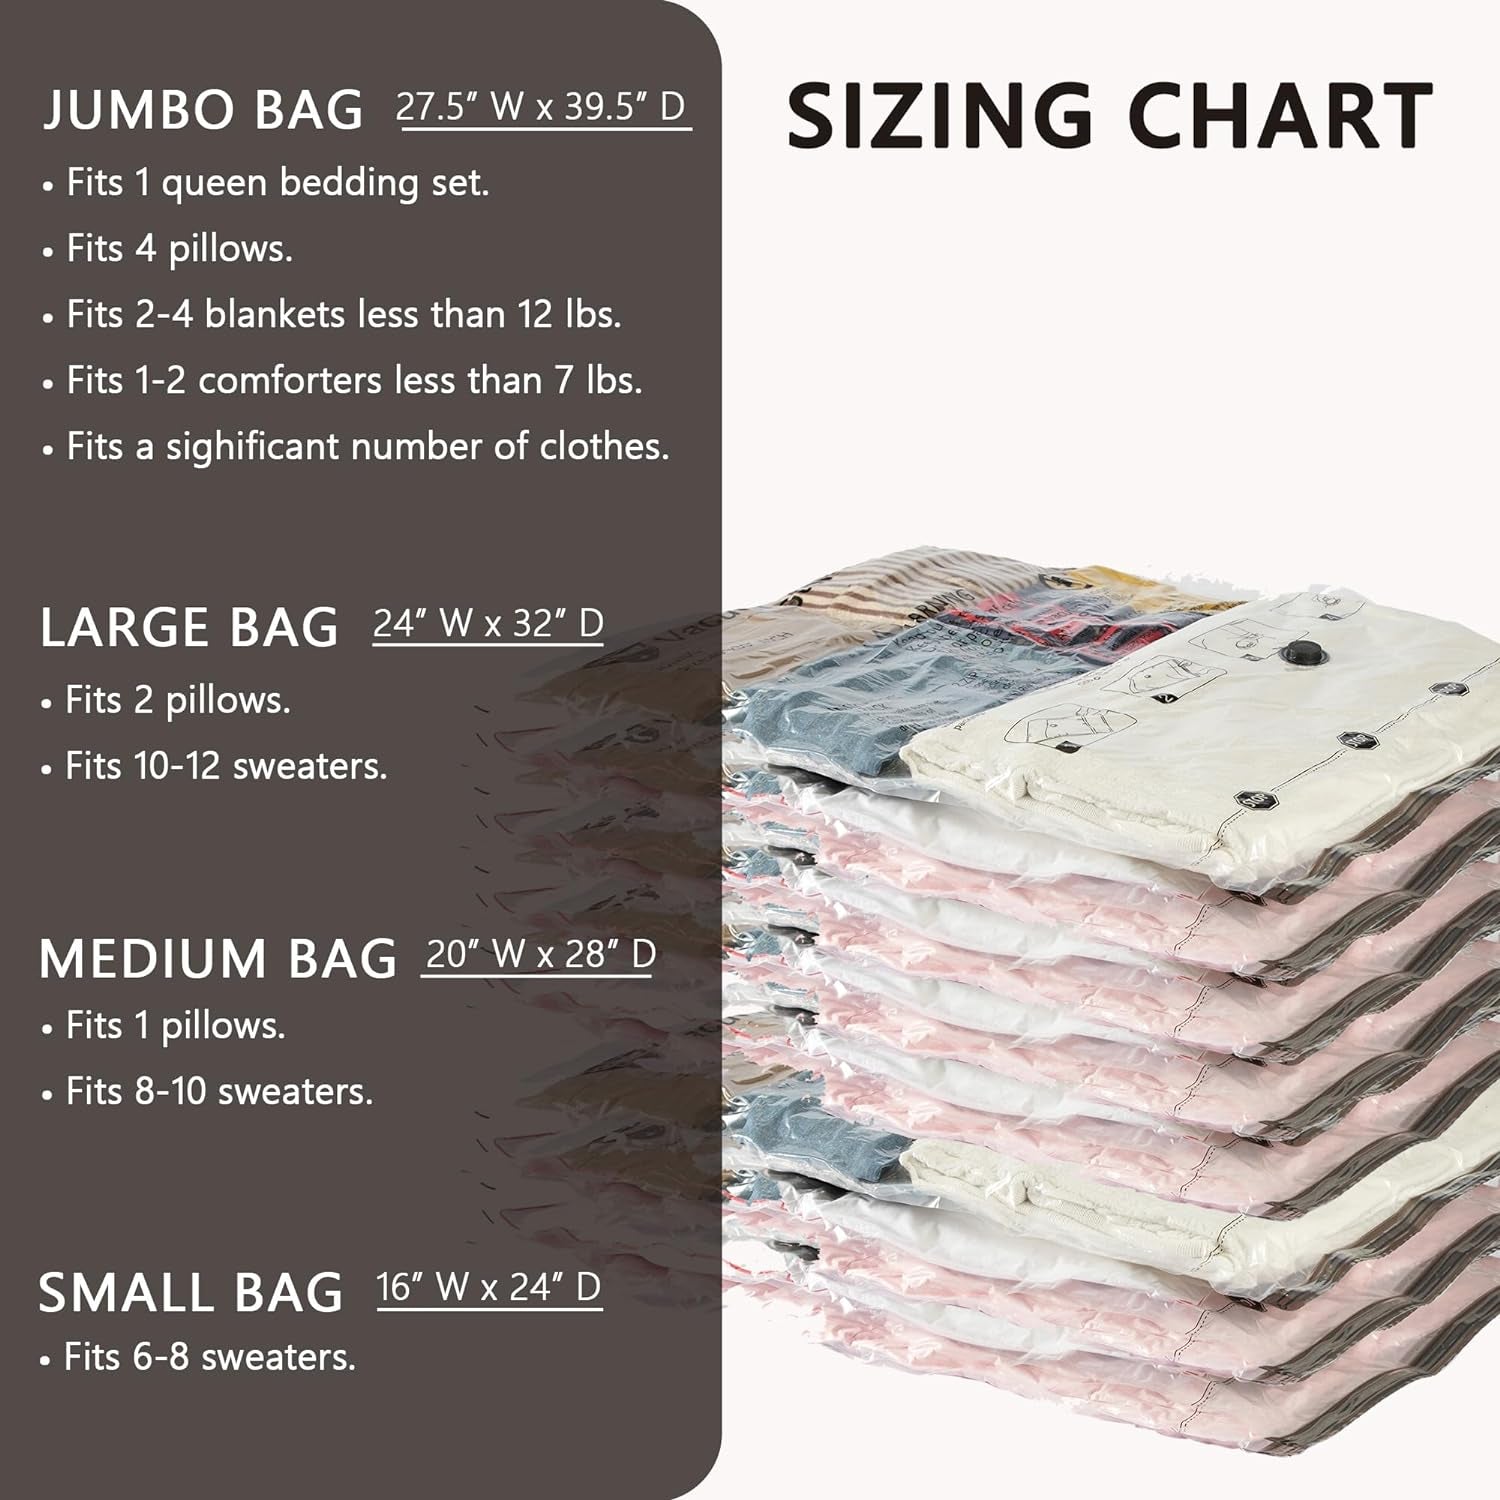 Vacuum Storage Bags, (4 Jumbo, 4 Large) Space Saver Bags with Travel Hand Pump, Compression Airtight Sealer Bags for Clothes, Bedding, Pillows, Comforters, Blankets